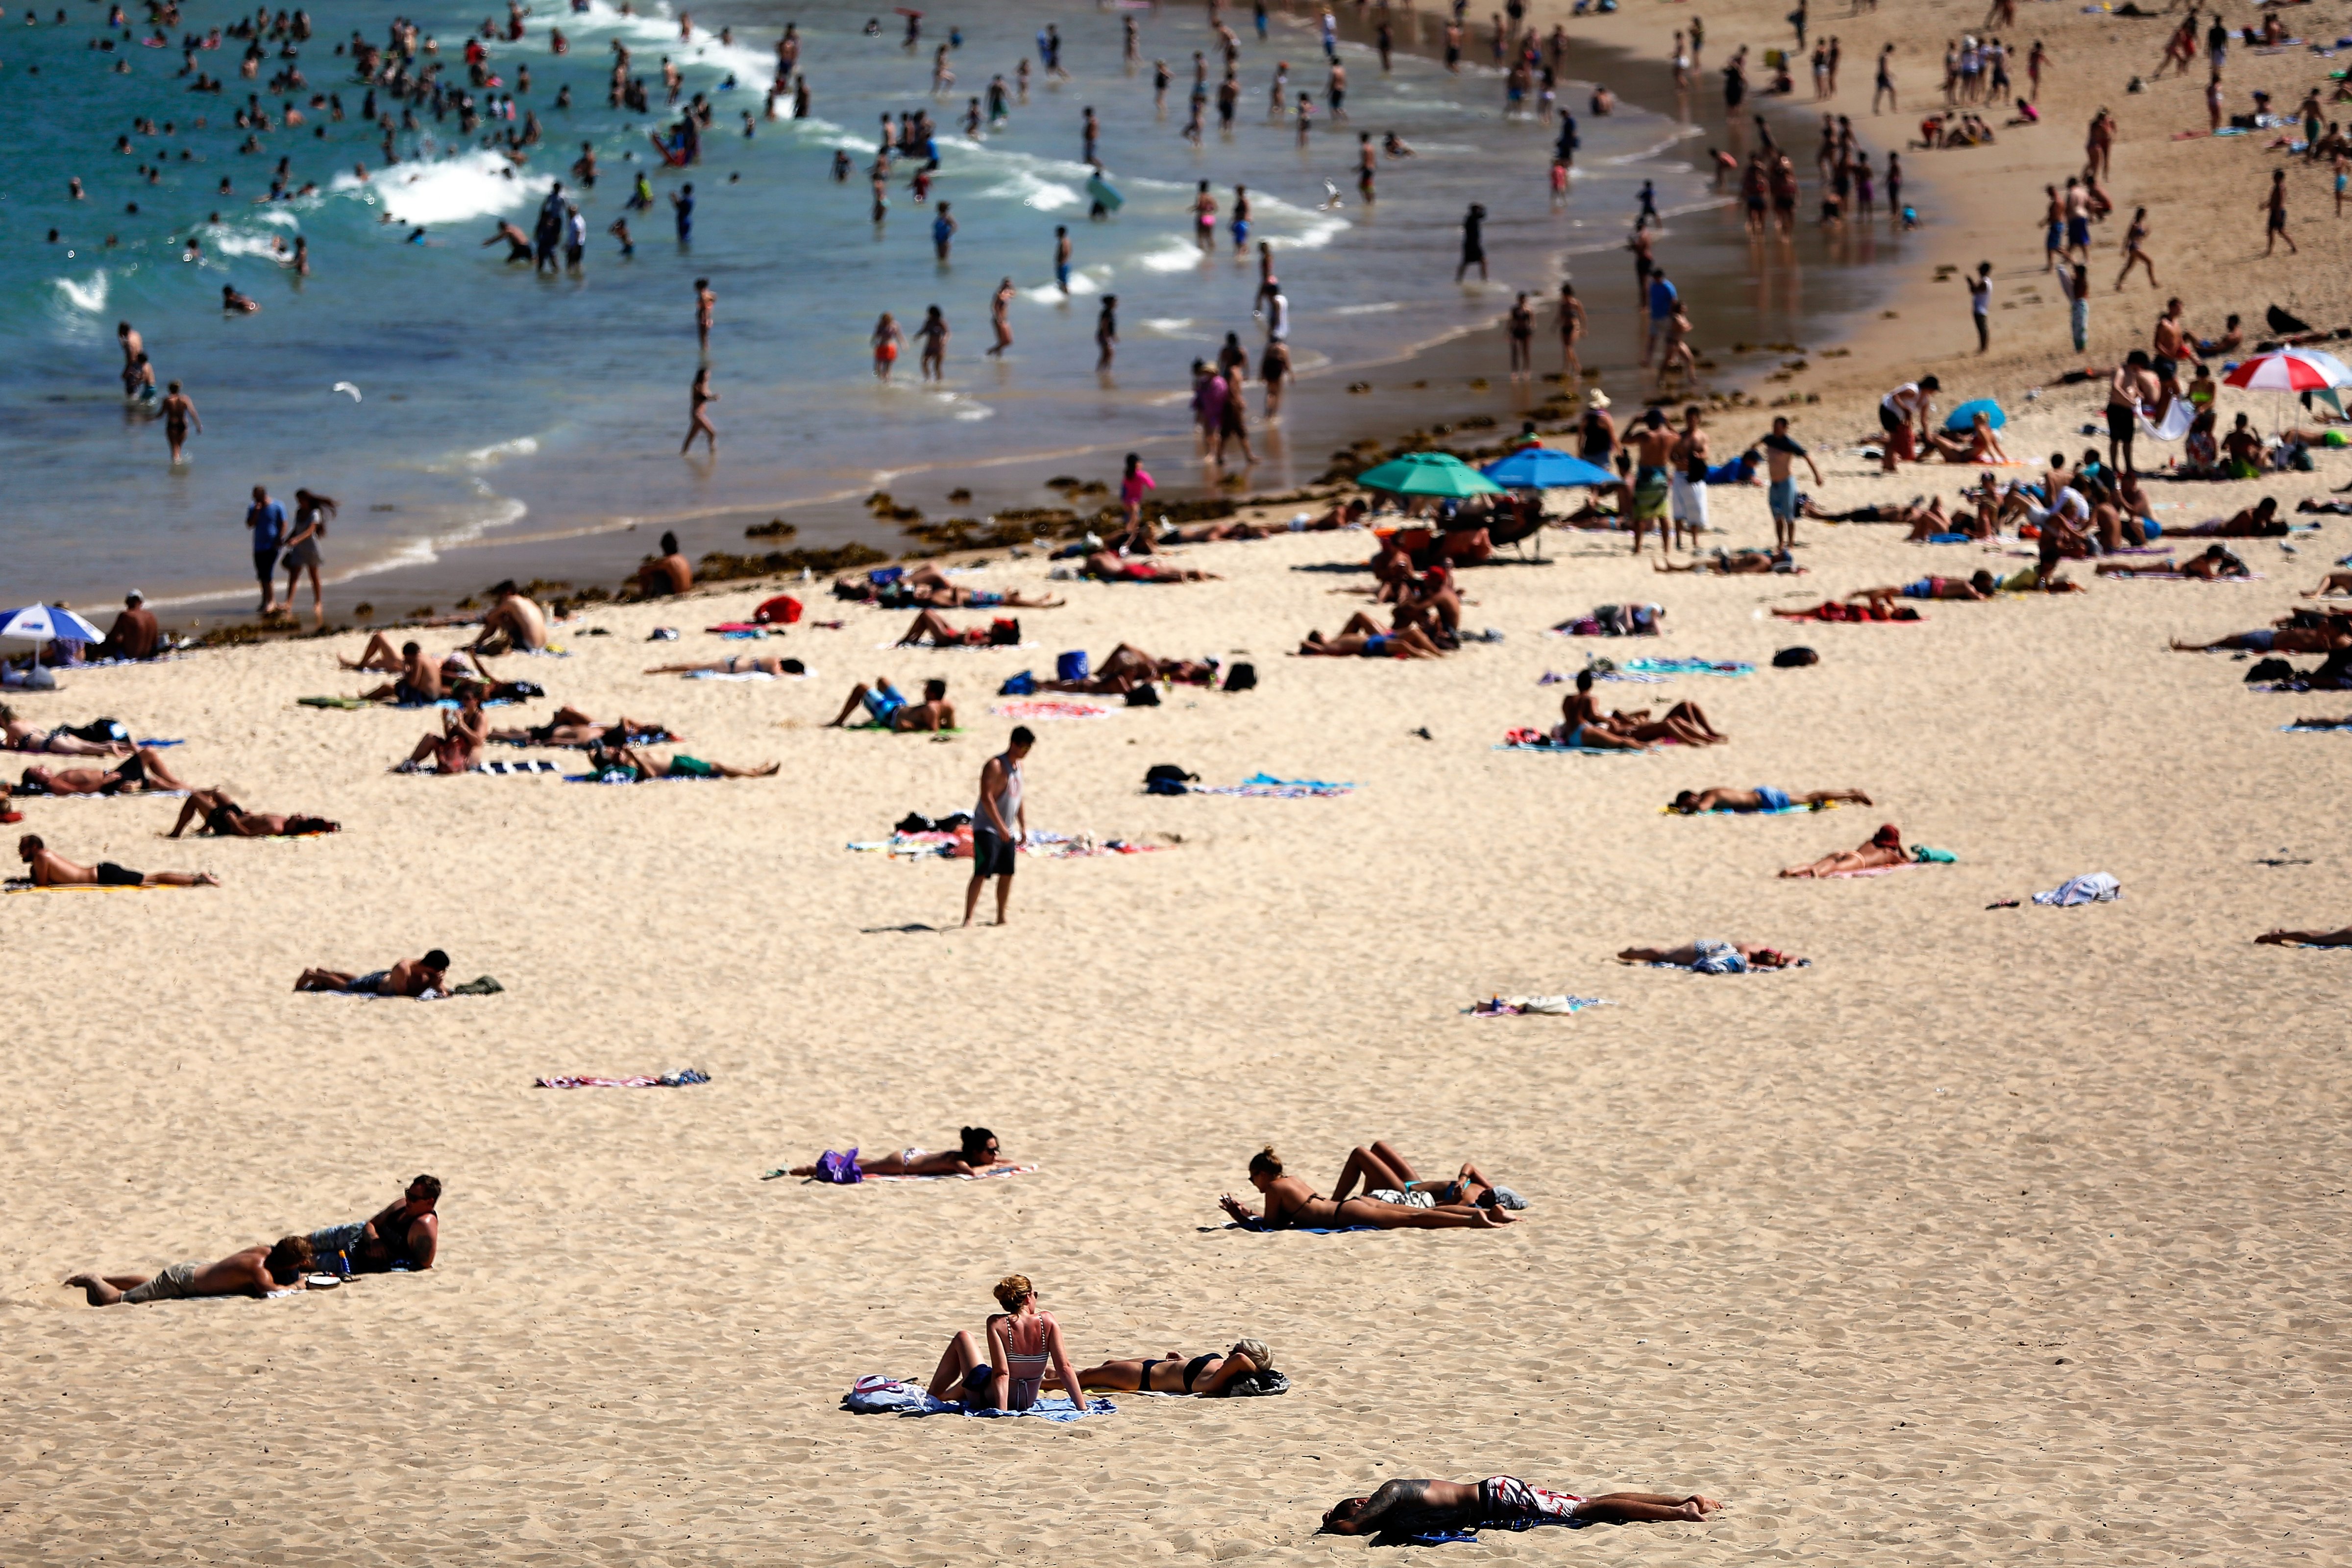 Beachgoers enjoy the hot weather at Coogee Beach on Jan. 13, 2016 in Sydney.